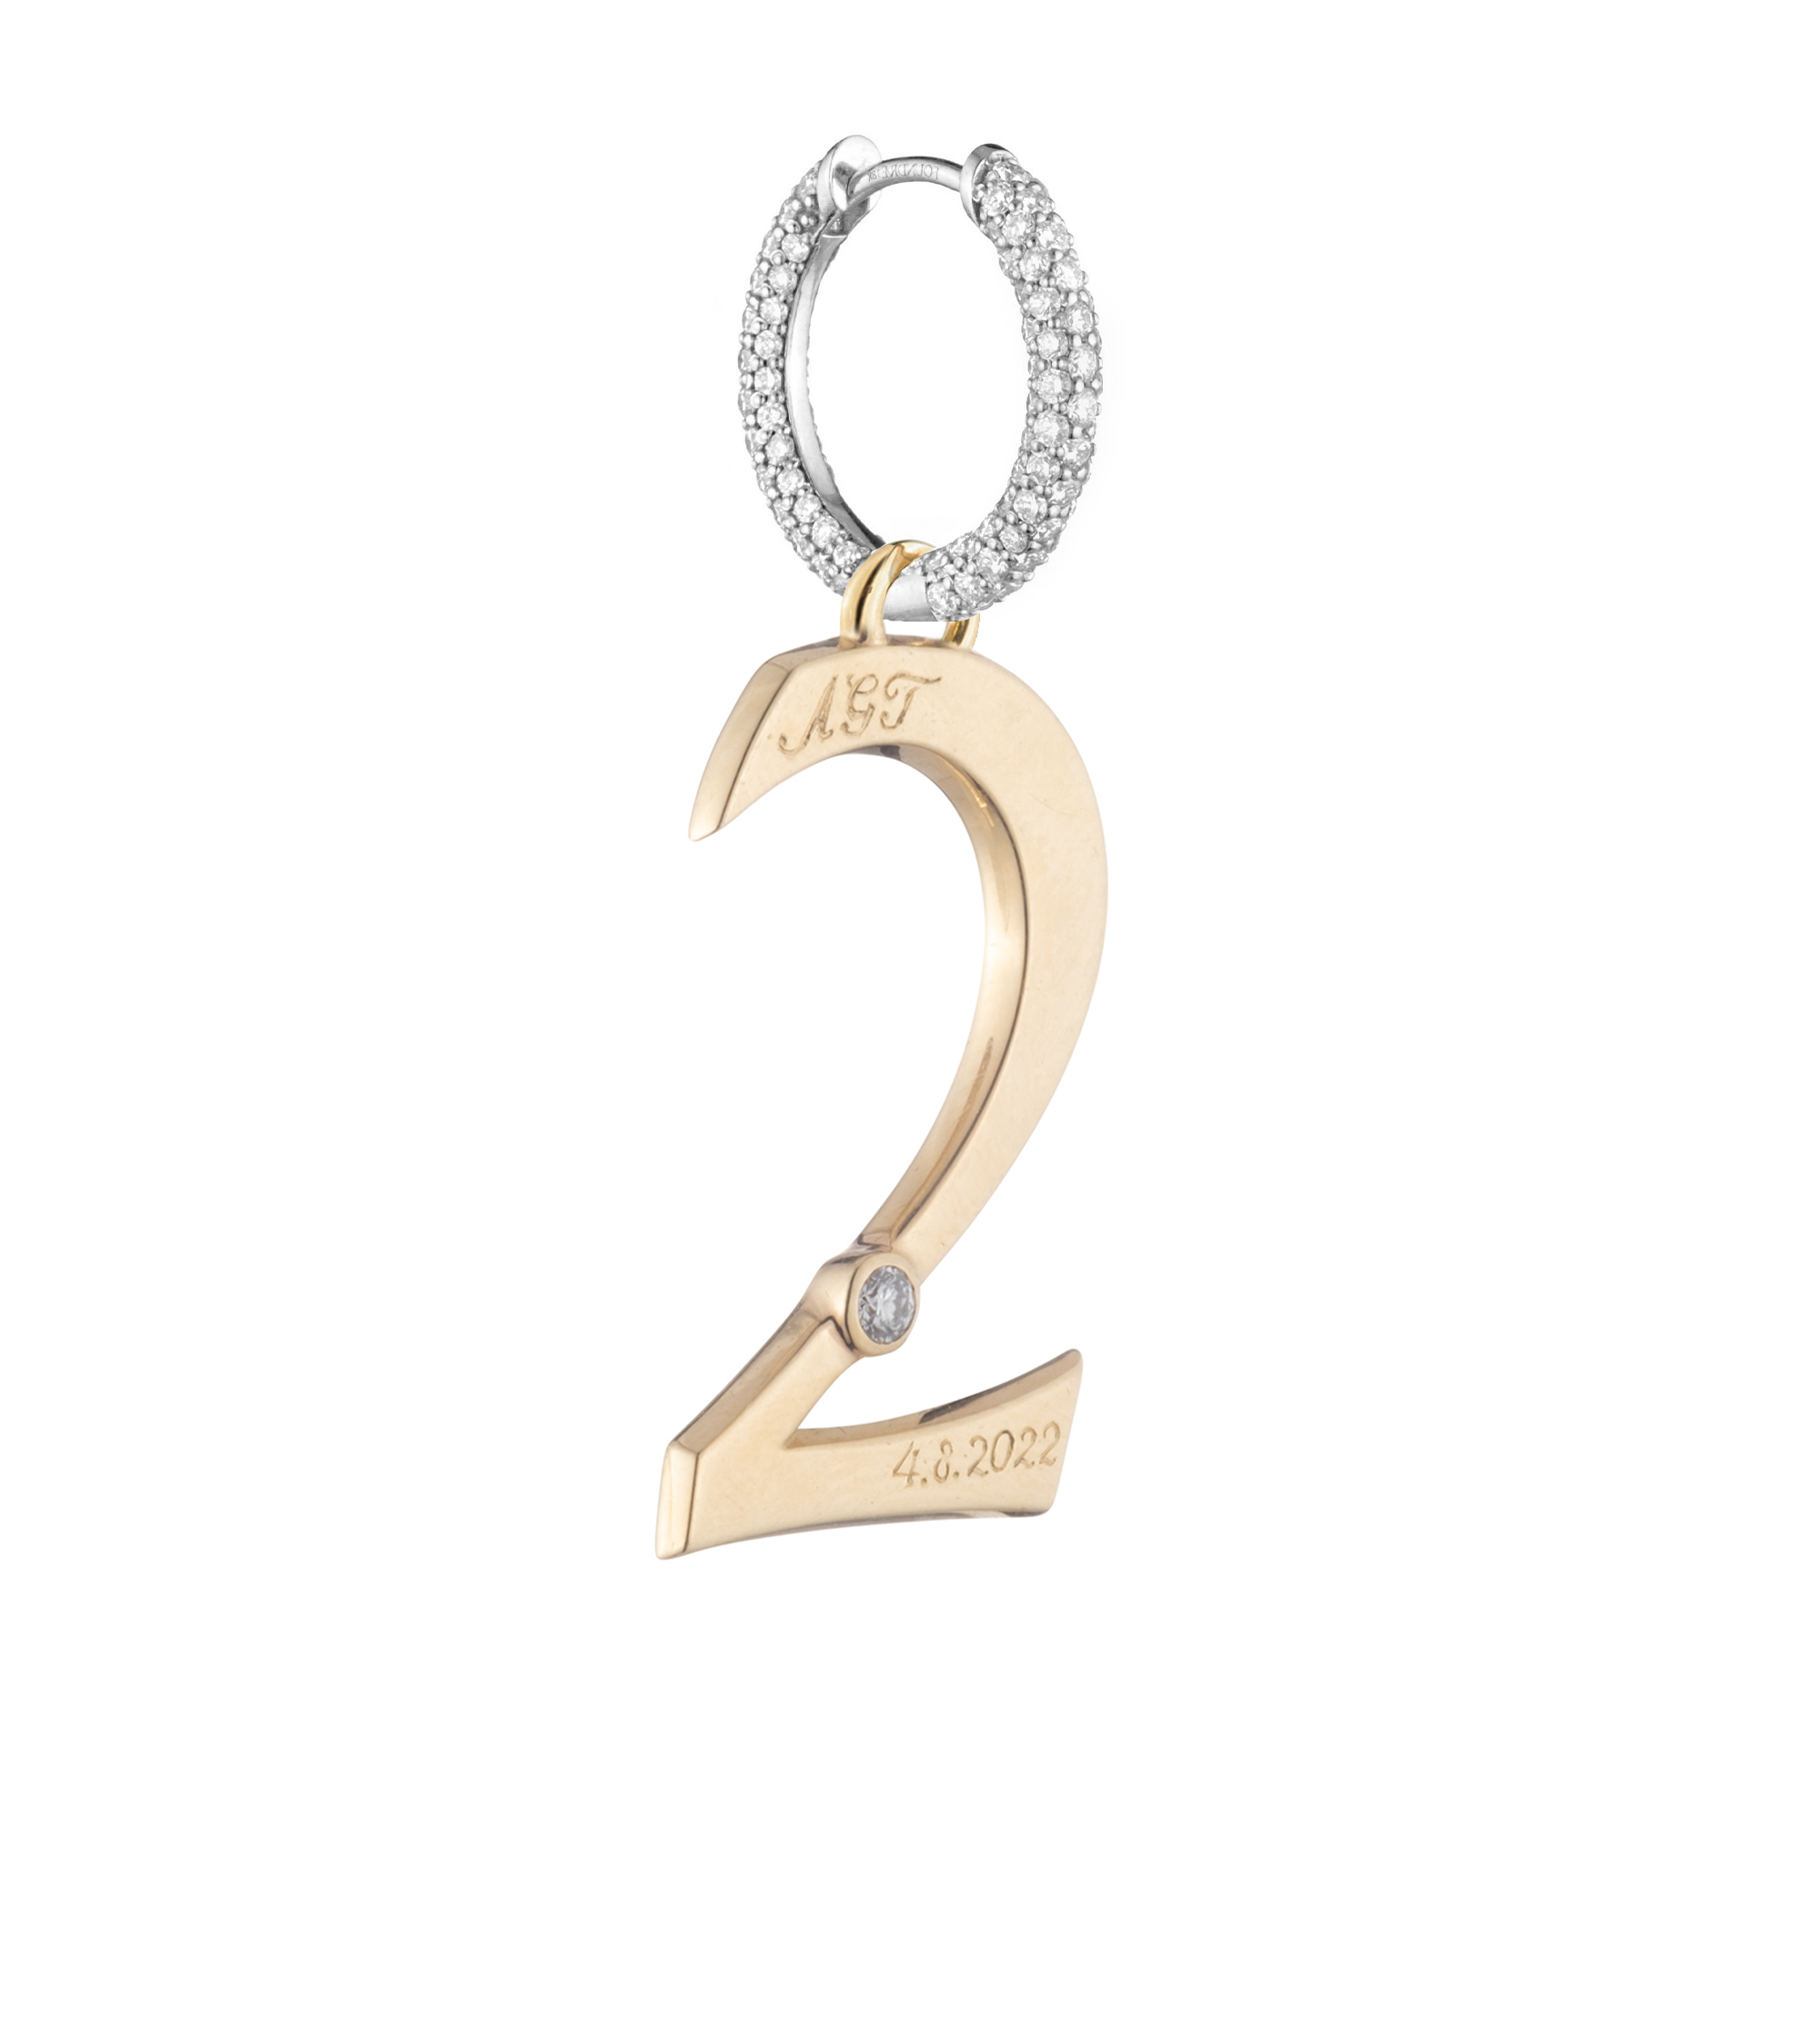 Engravable Number 2 : Oversized Small Pave Chubby Ear Hoop